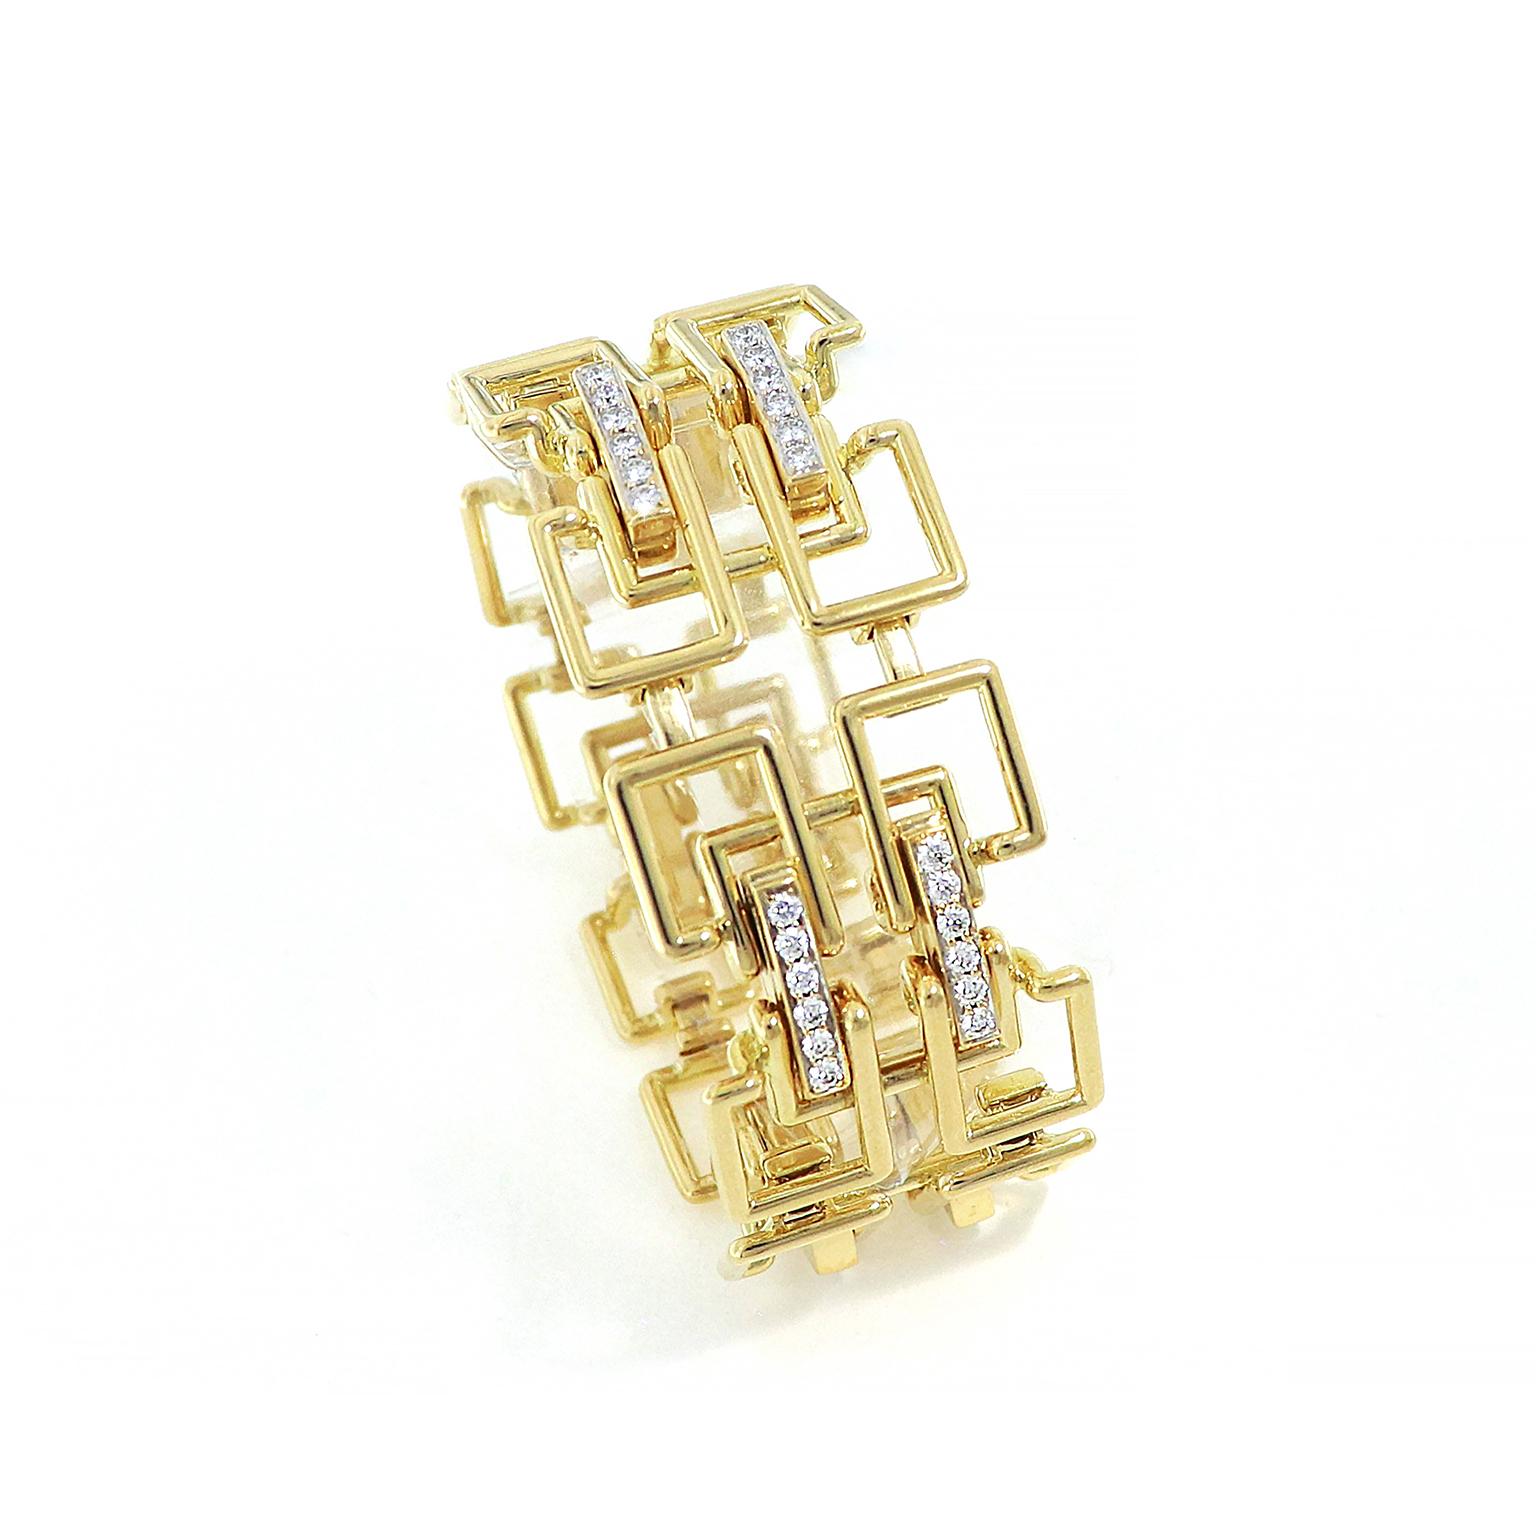 The warm glow of 18k yellow gold forms a geometric Art Deco-inspired motif accented by the flicker of brilliant cut diamonds. Layers of the sleek metal give it dimension with a square base featuring extending strands morphed into a square to overlay